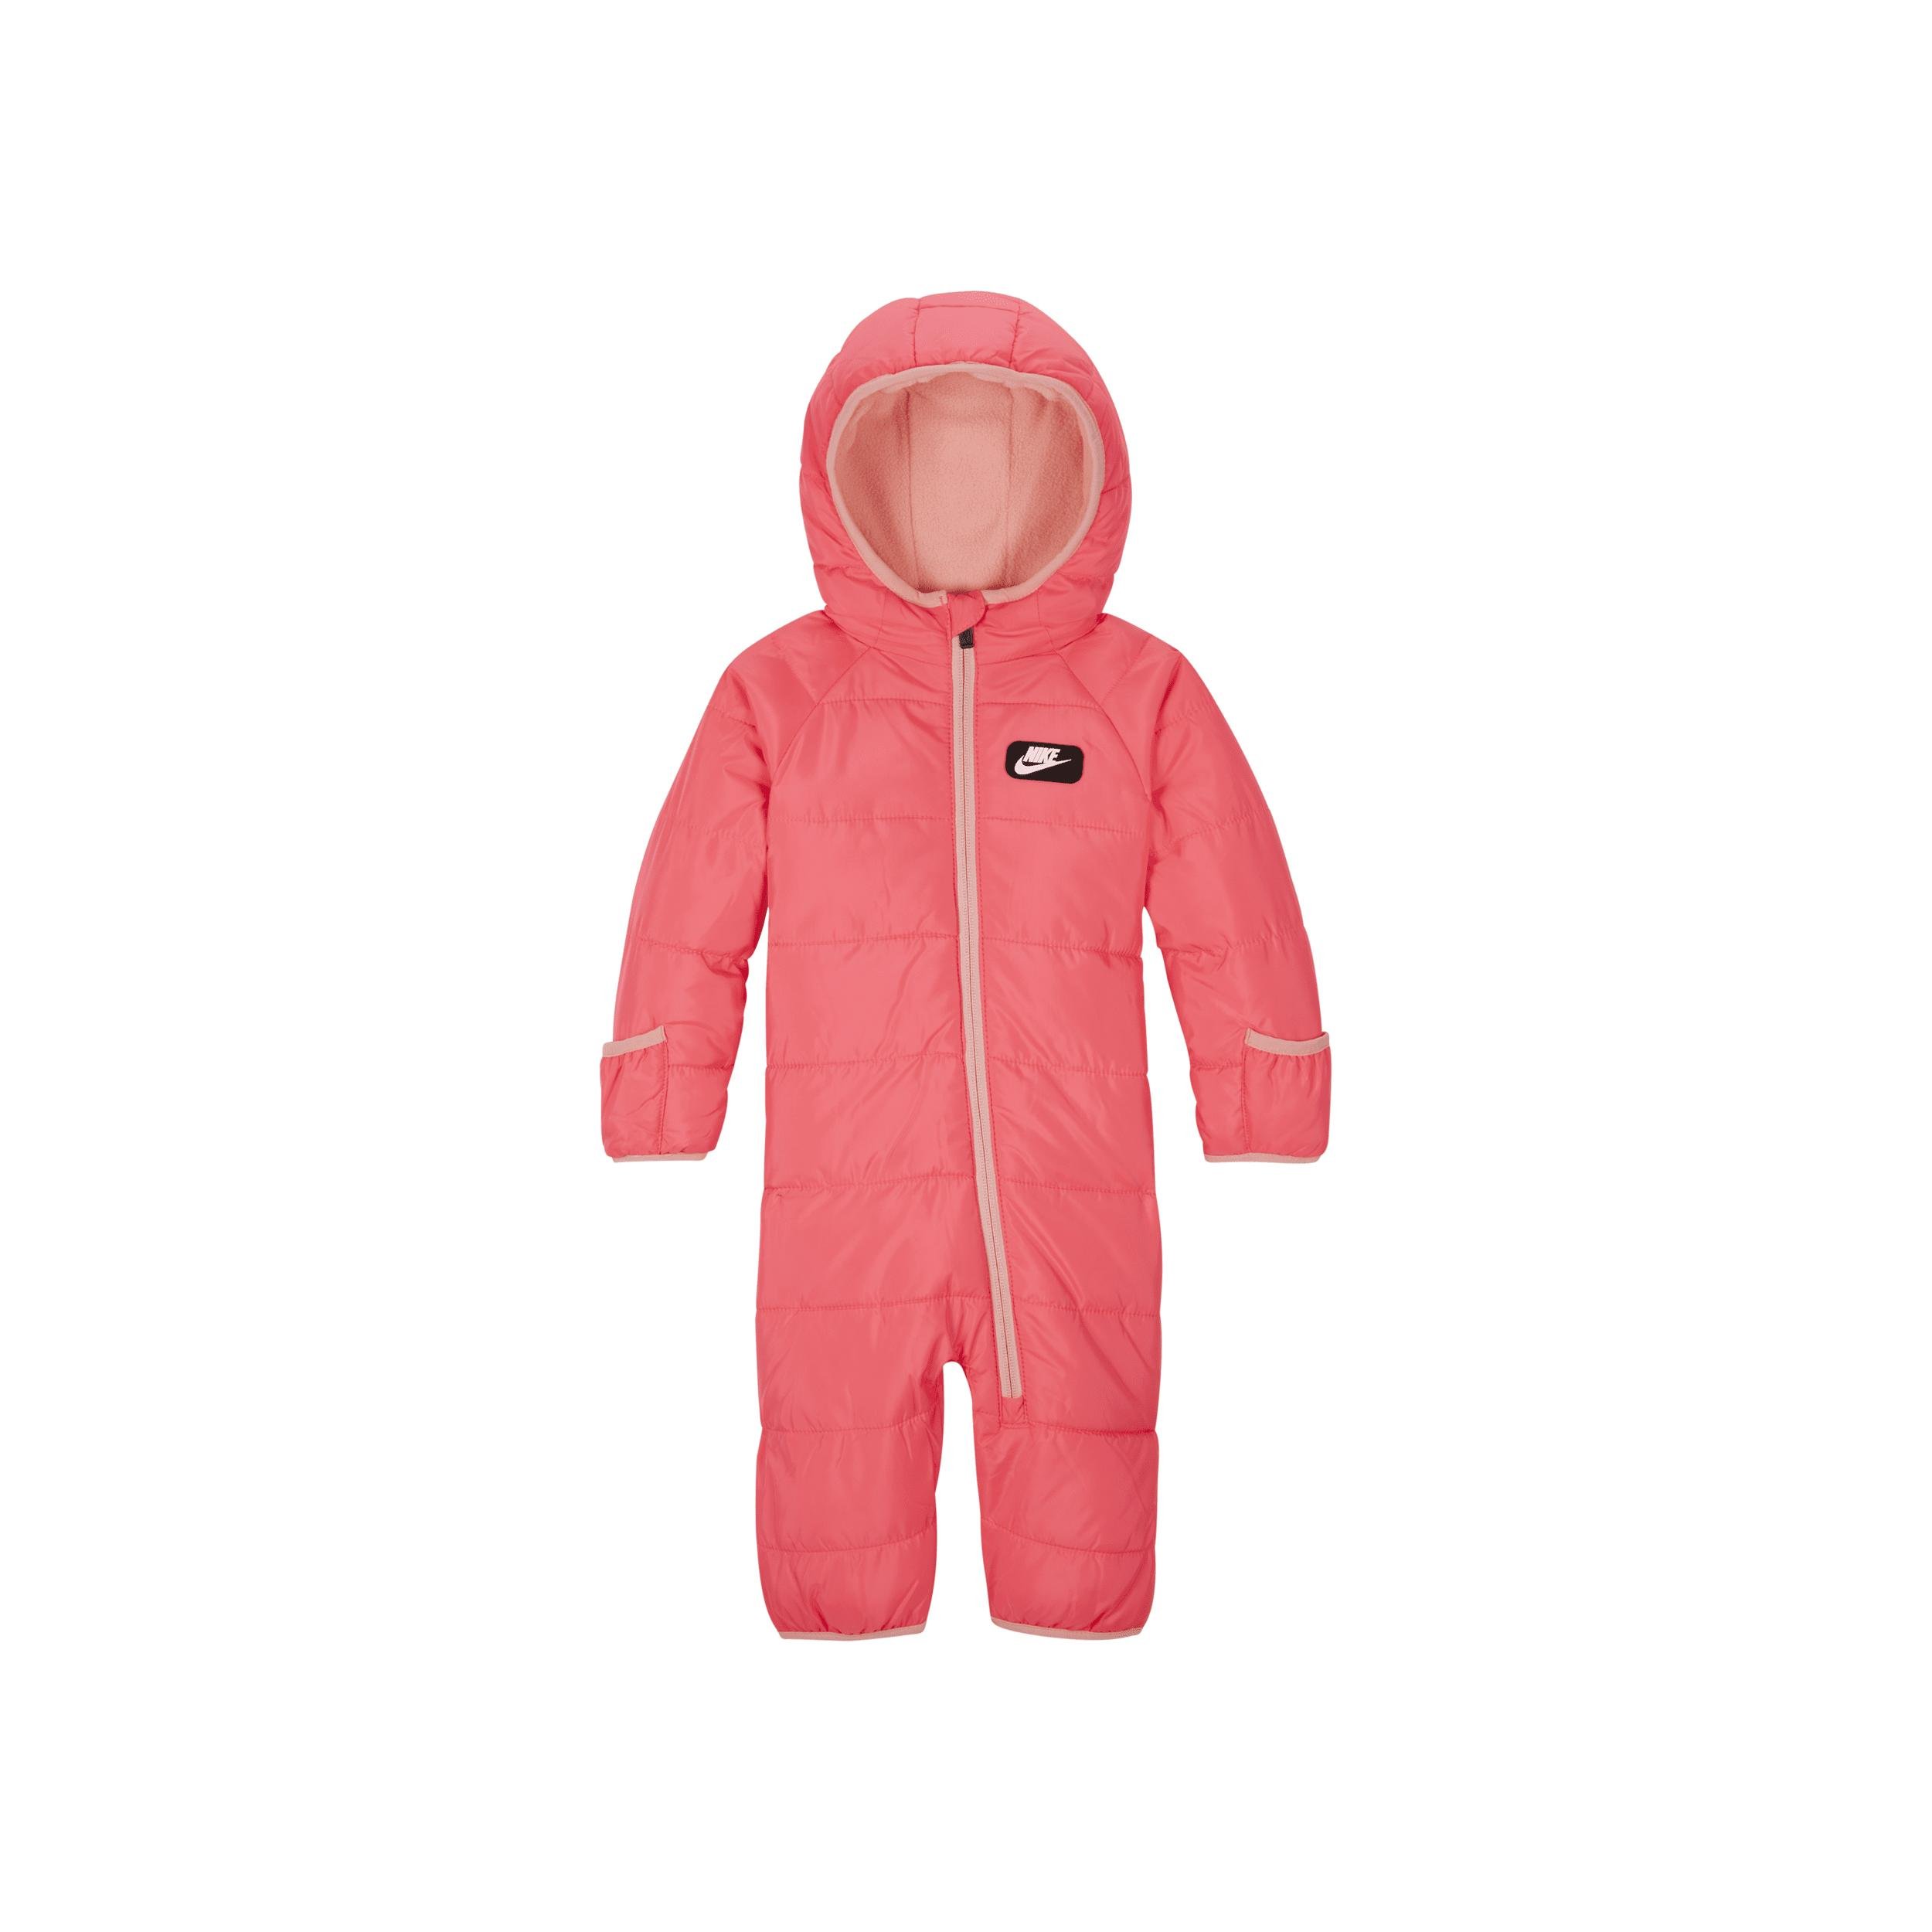 Nike Baby (0-9M) Puffer Snowsuit by NIKE